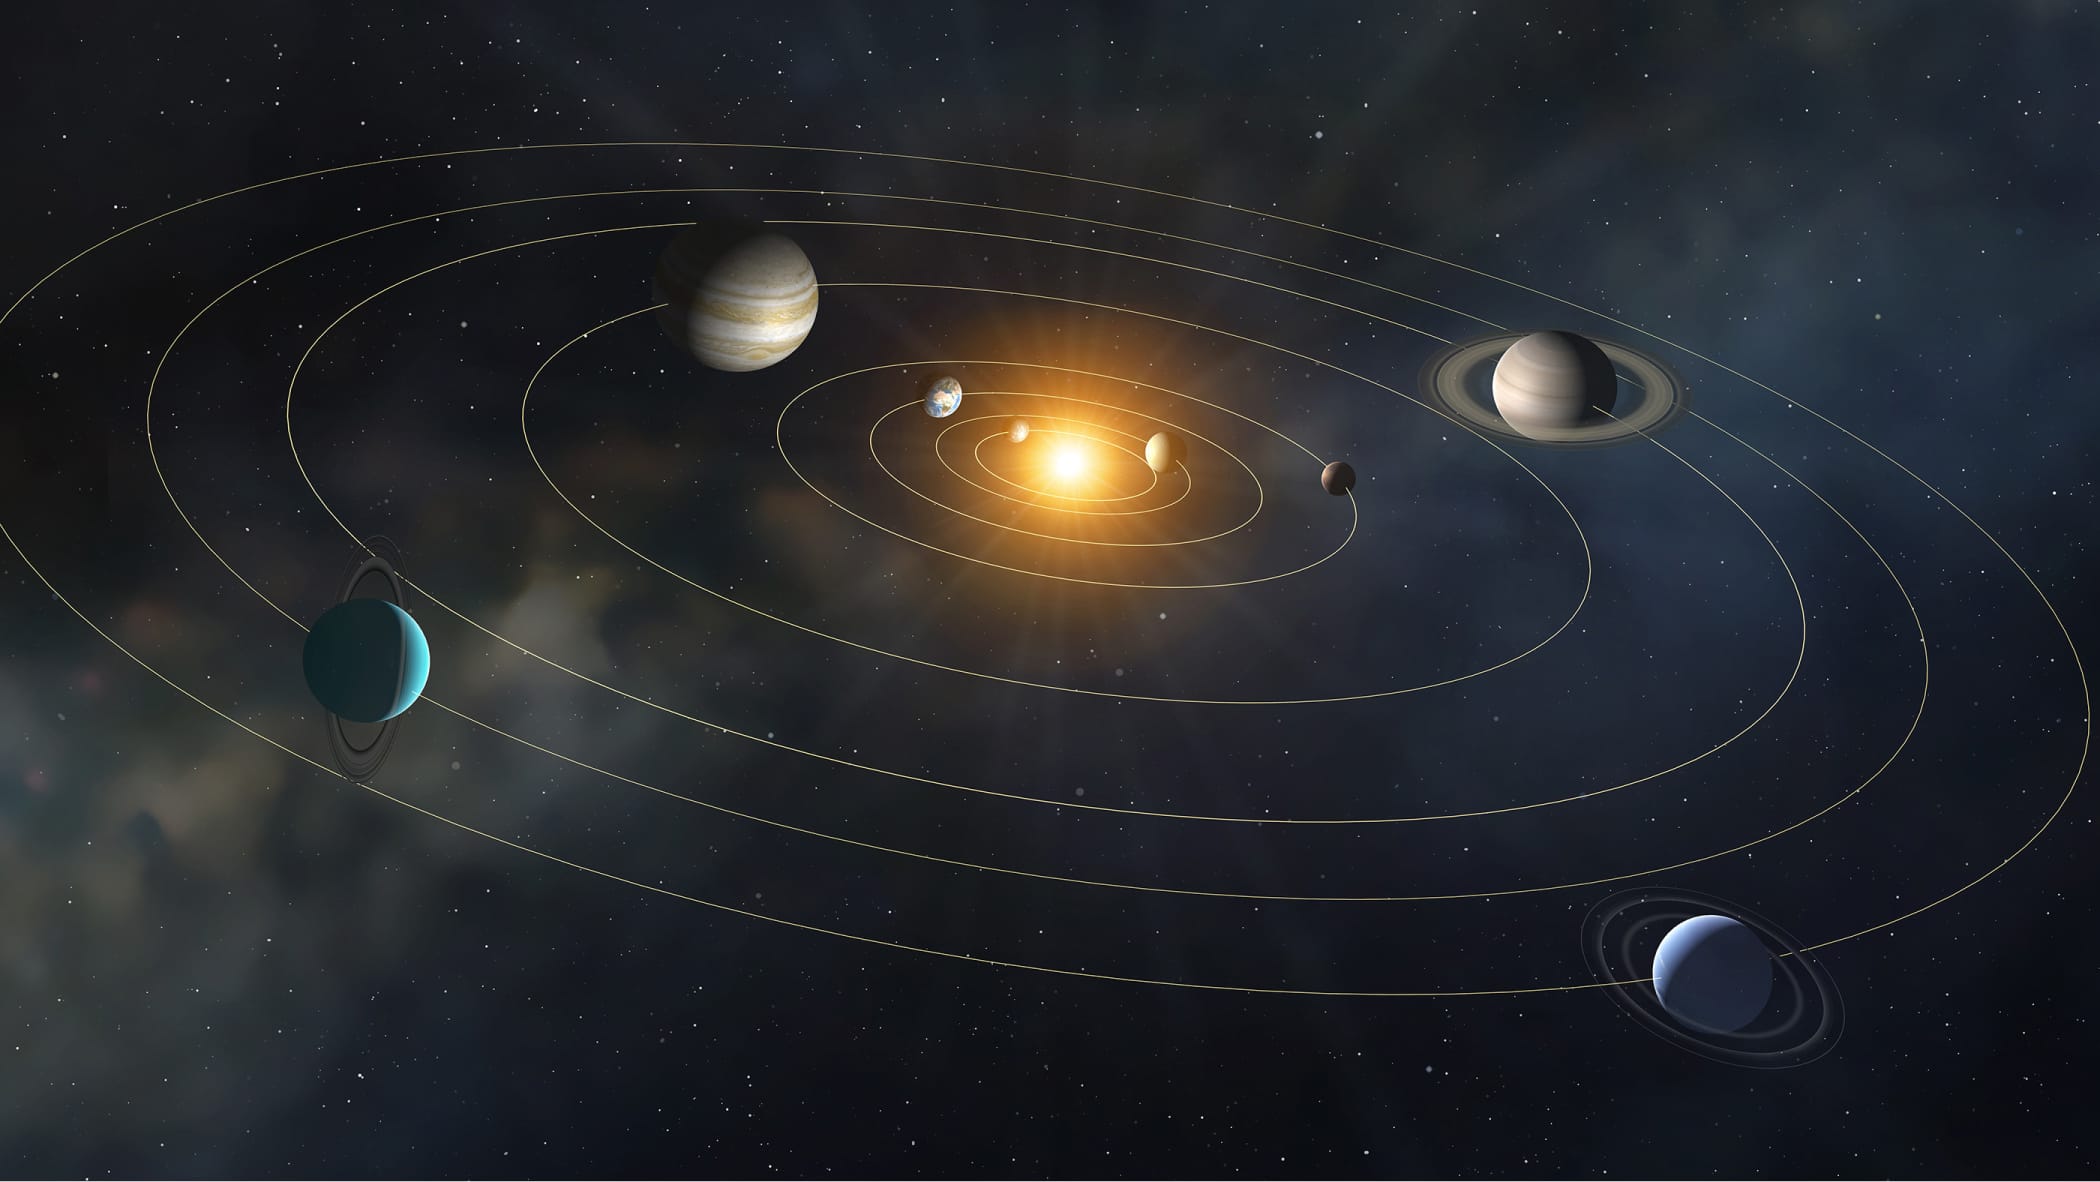 Illustration of the solar system with the sun at the center and the planets orbiting it with their orbit paths denoted by lines.